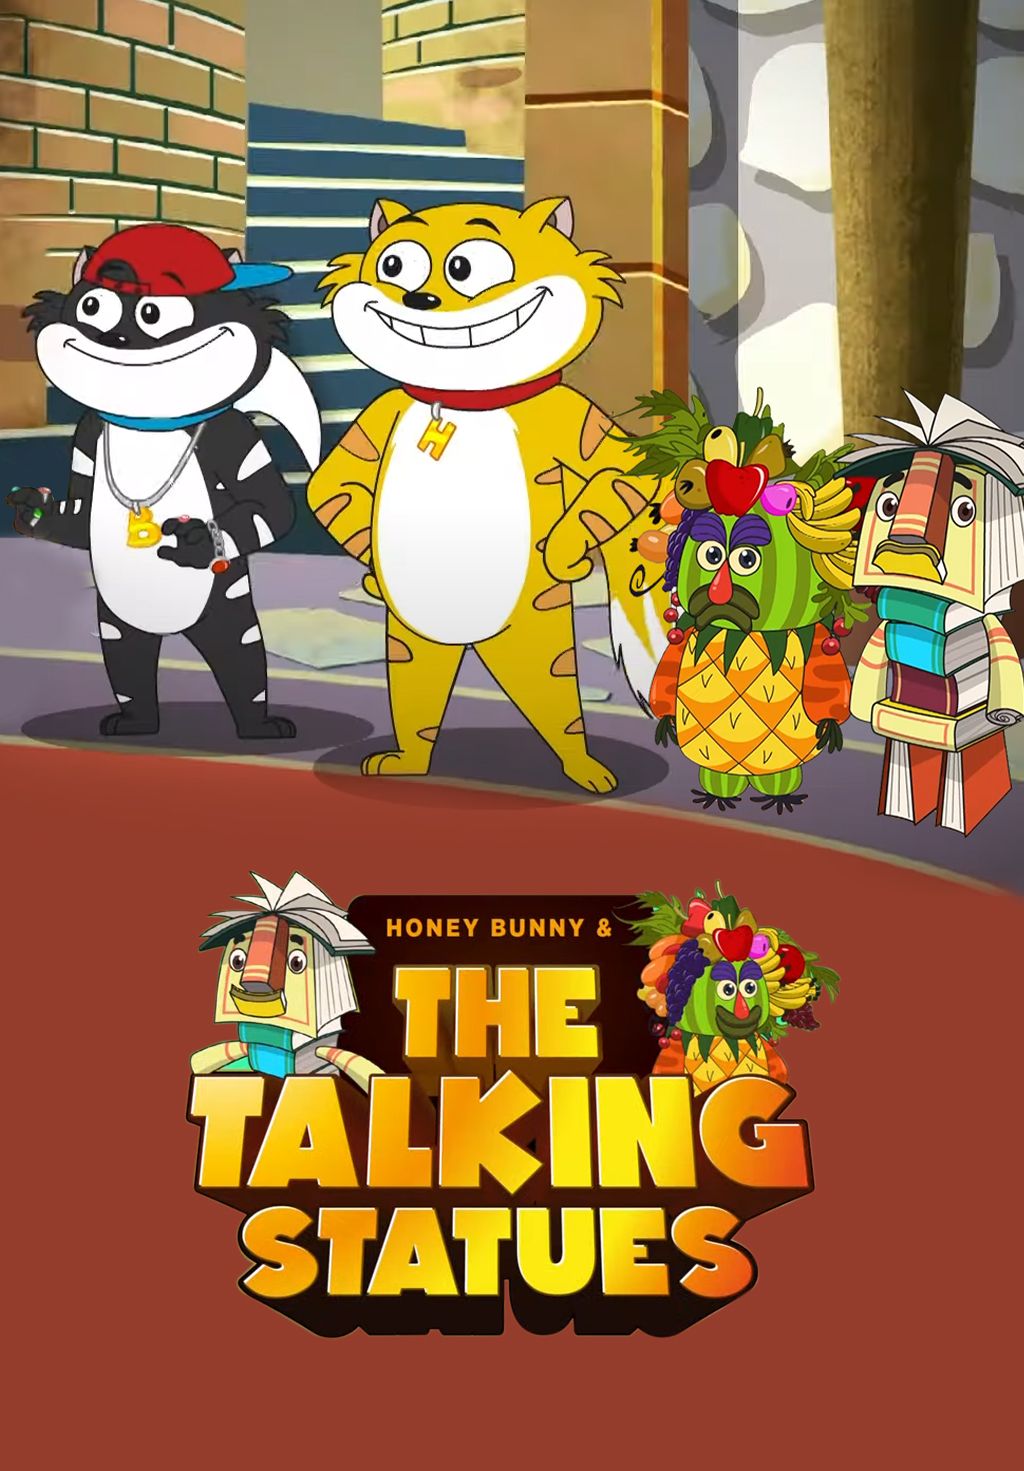 Honey Bunny and The Talking Statues